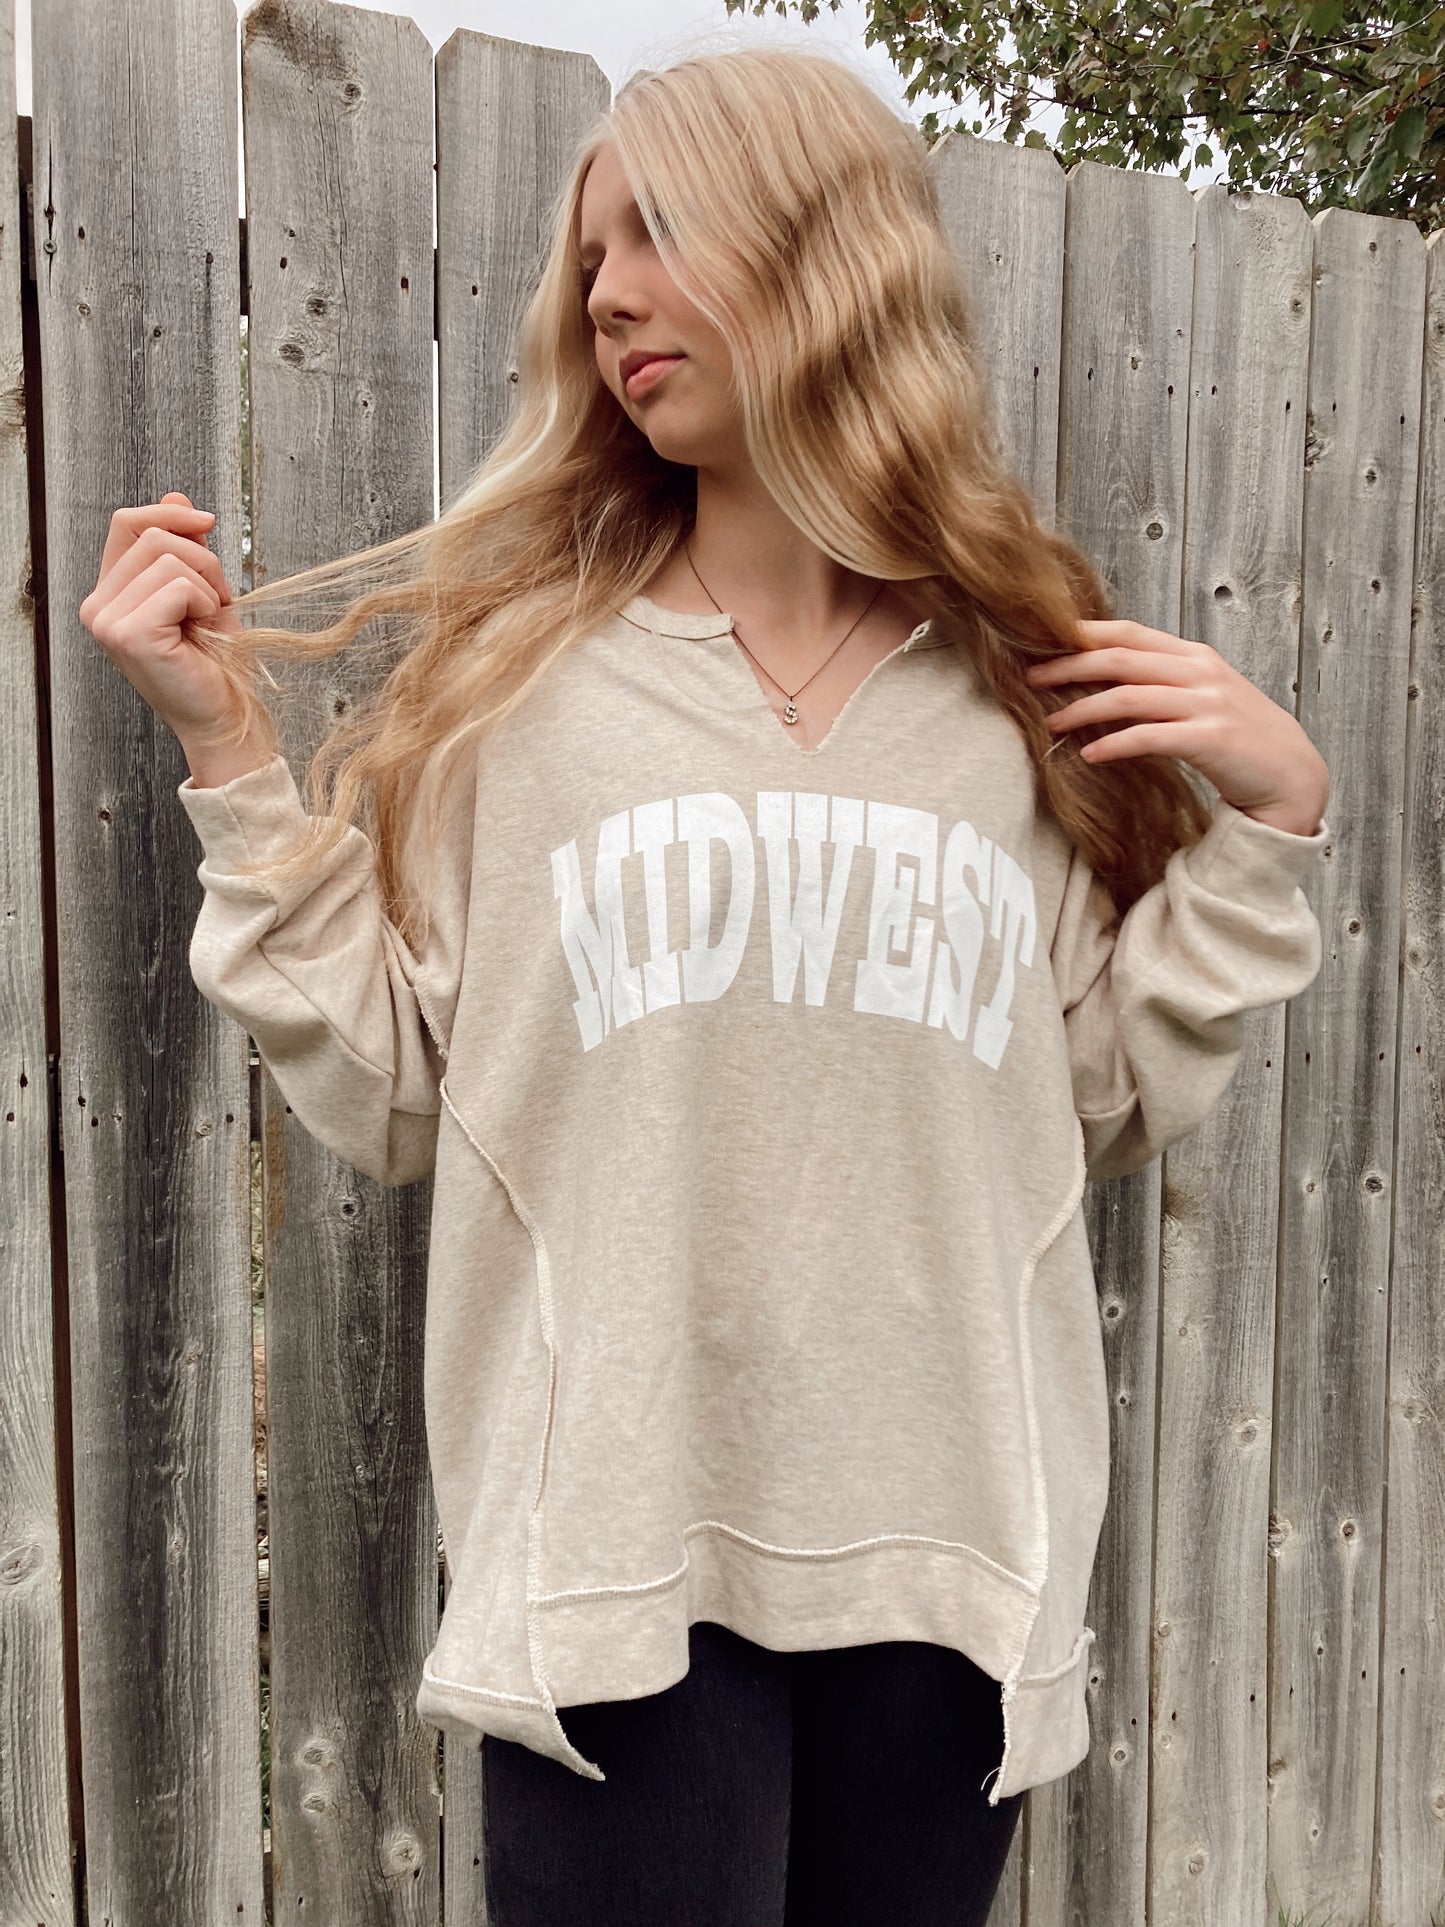 Midwest Long Sleeve Top